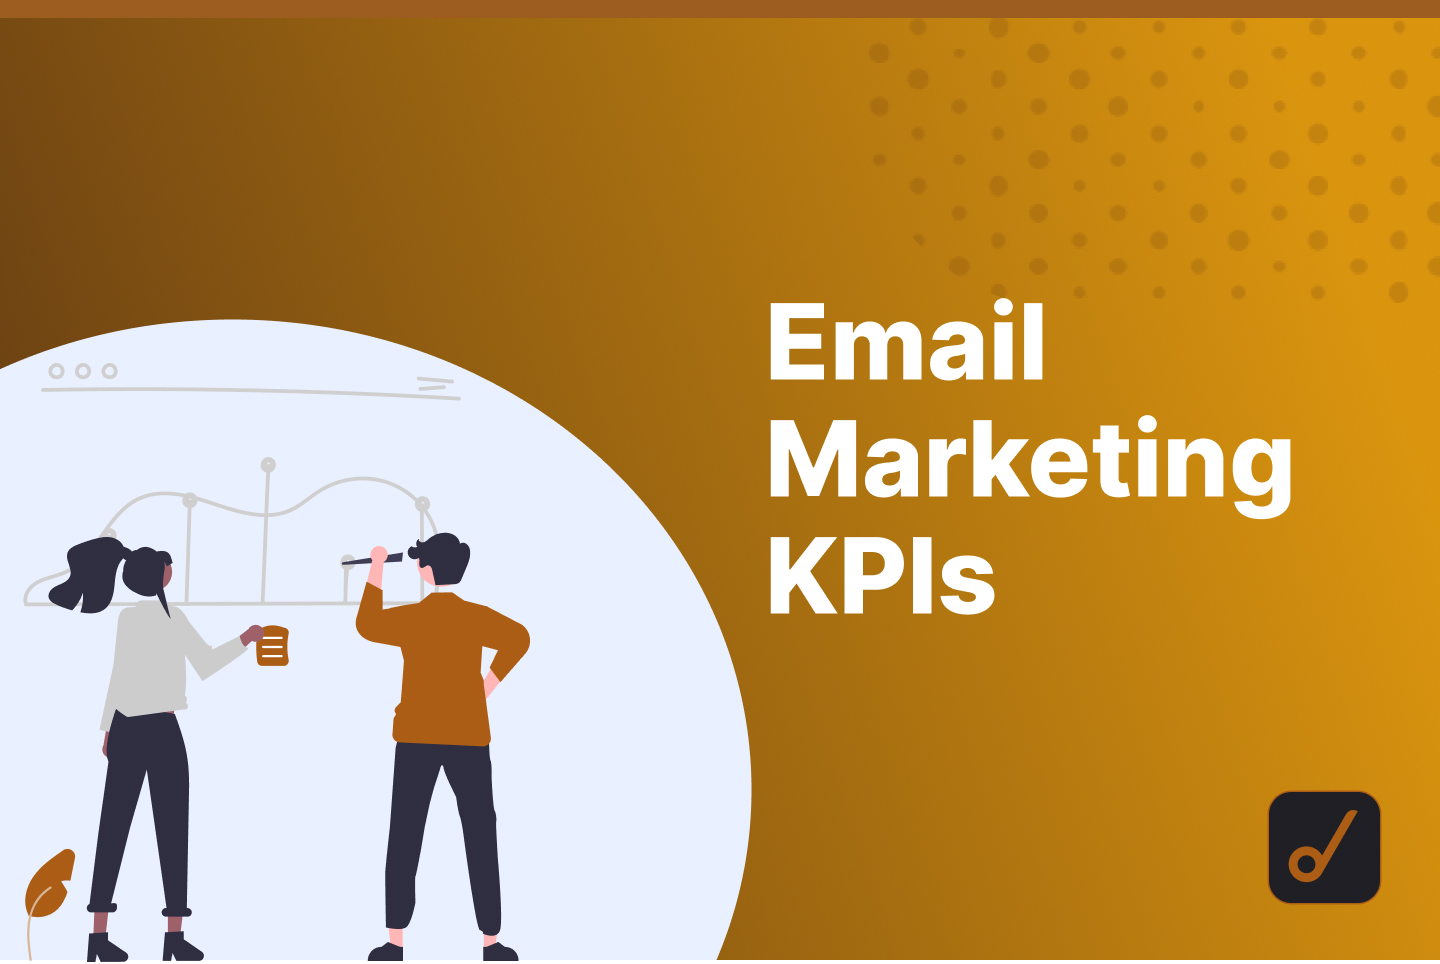 Top 7 Email Marketing KPIs For 2022